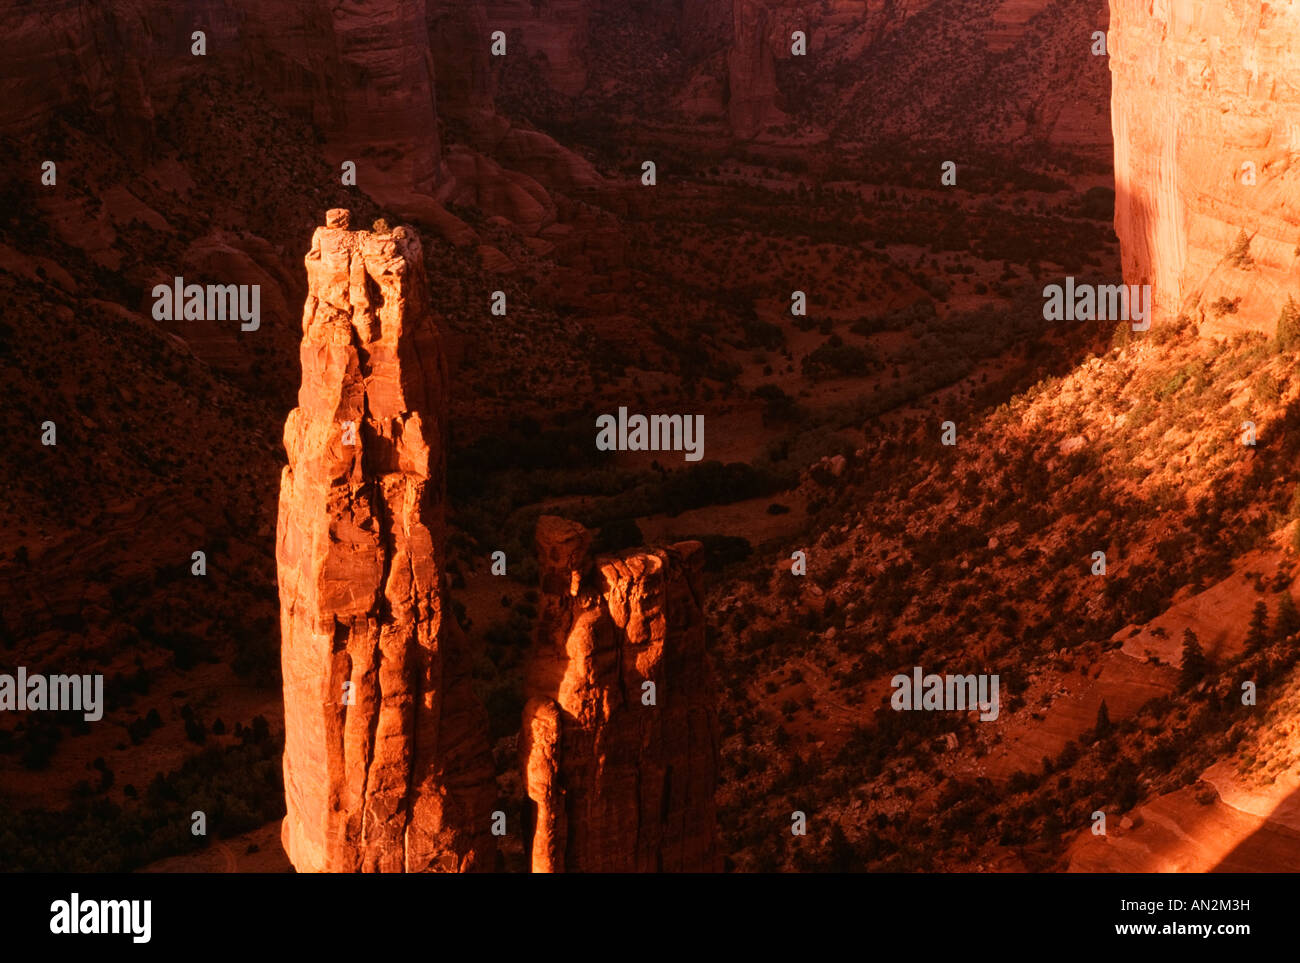 Spider Rock, Canyon de Chelly National Monument, Arizona, United States of America Stock Photo